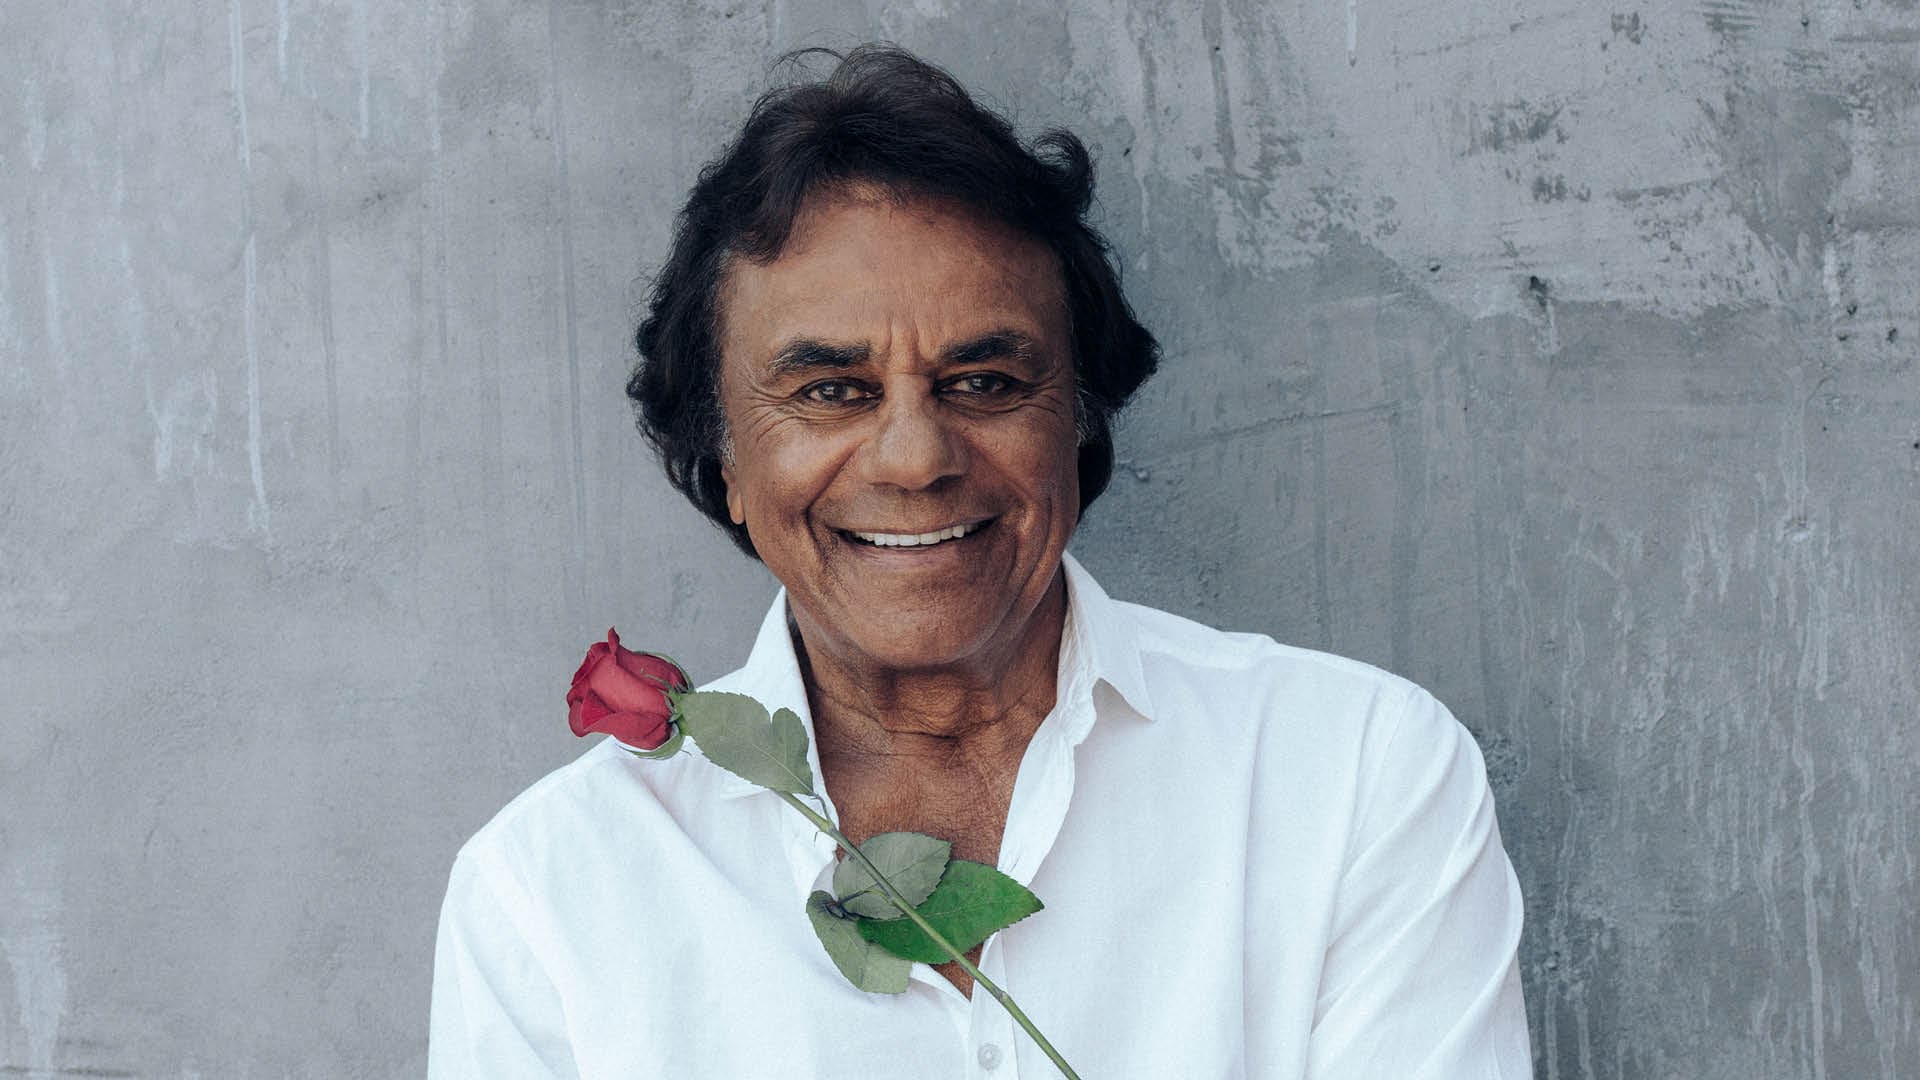 Johnny Mathis: The Voice of Romance Tour